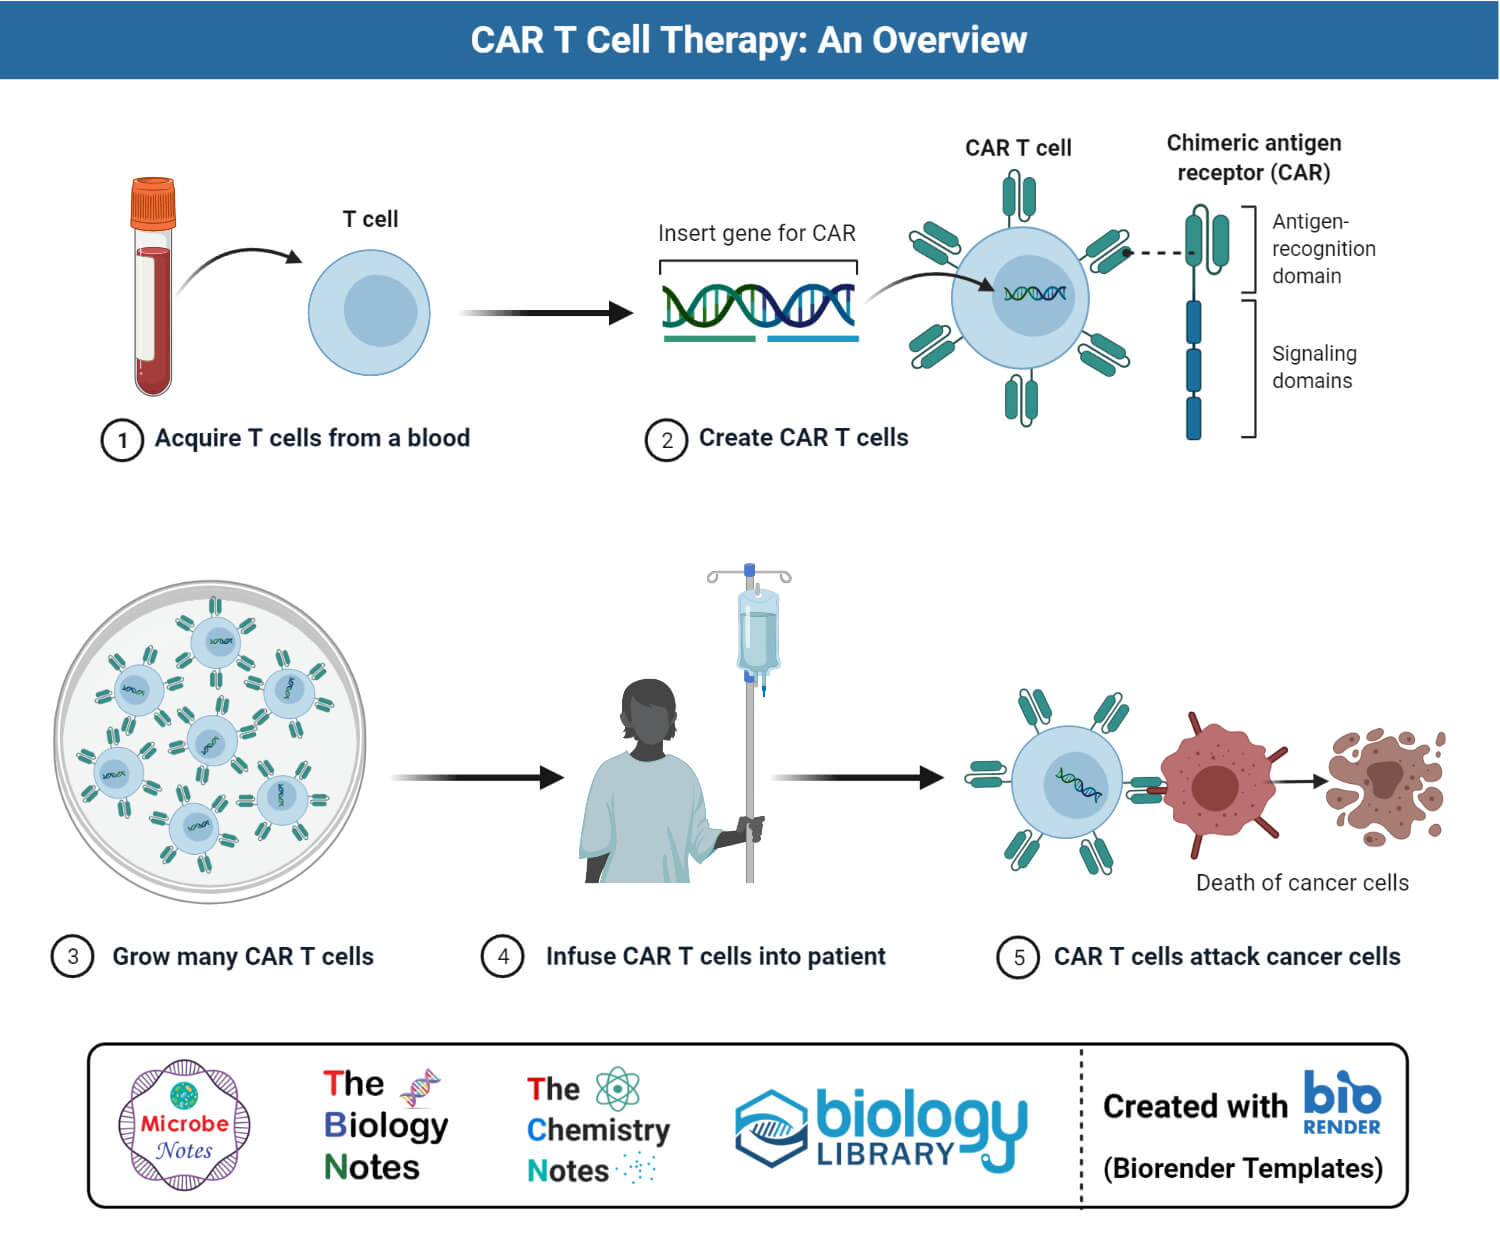 Chimeric Antigen Receptor (CAR) T Cell generation and cancer therapy